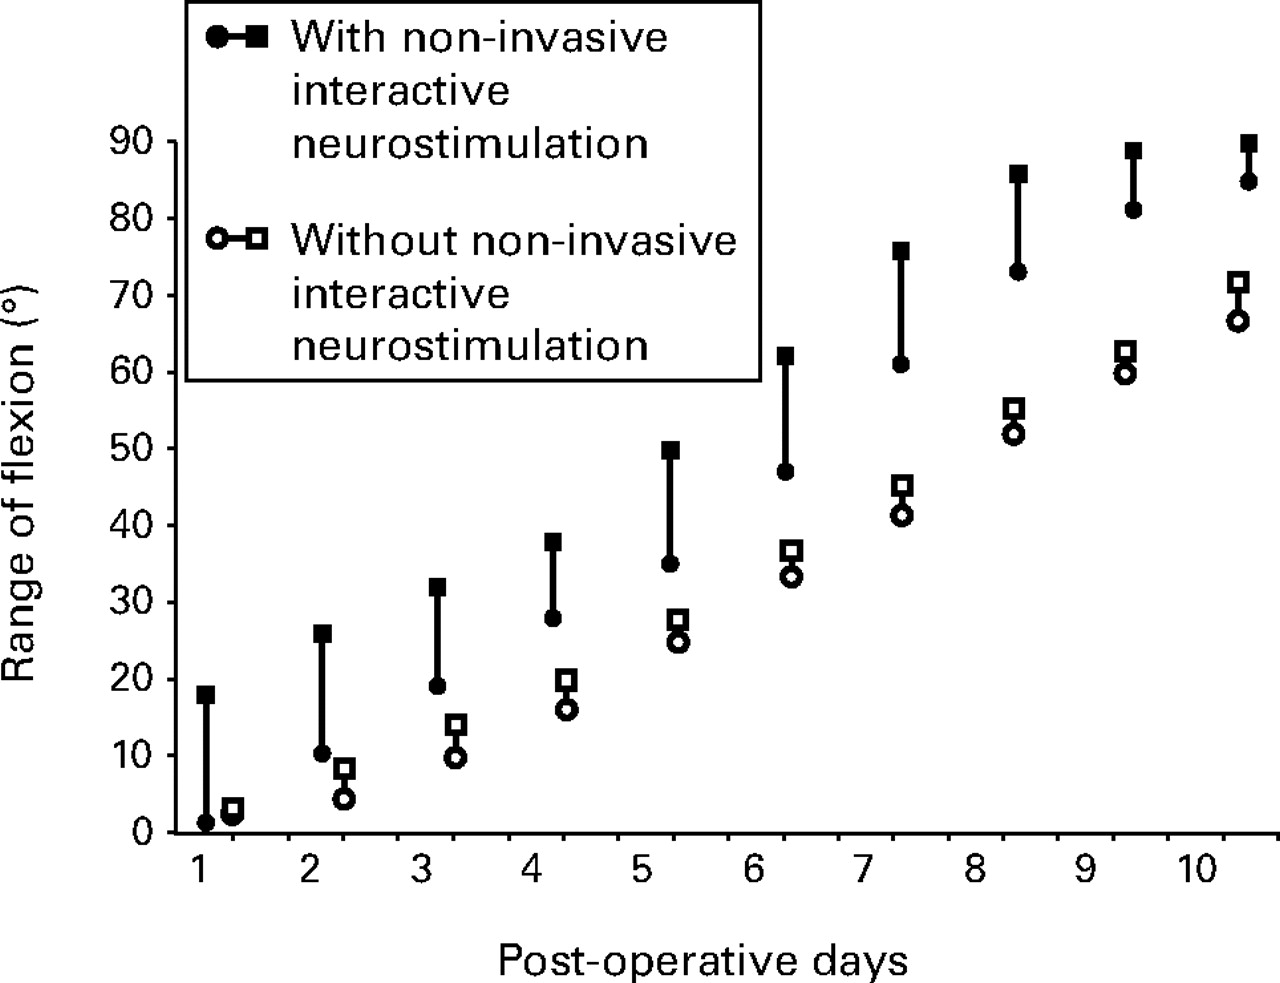 Fig. 4  
            Mean range of flexion with and without non-invasive interactive neuro stimulation. The bars represent the mean range of flexion. The mean range of flexion before treatment is represented by a circle, and afte treatment by a square.
          